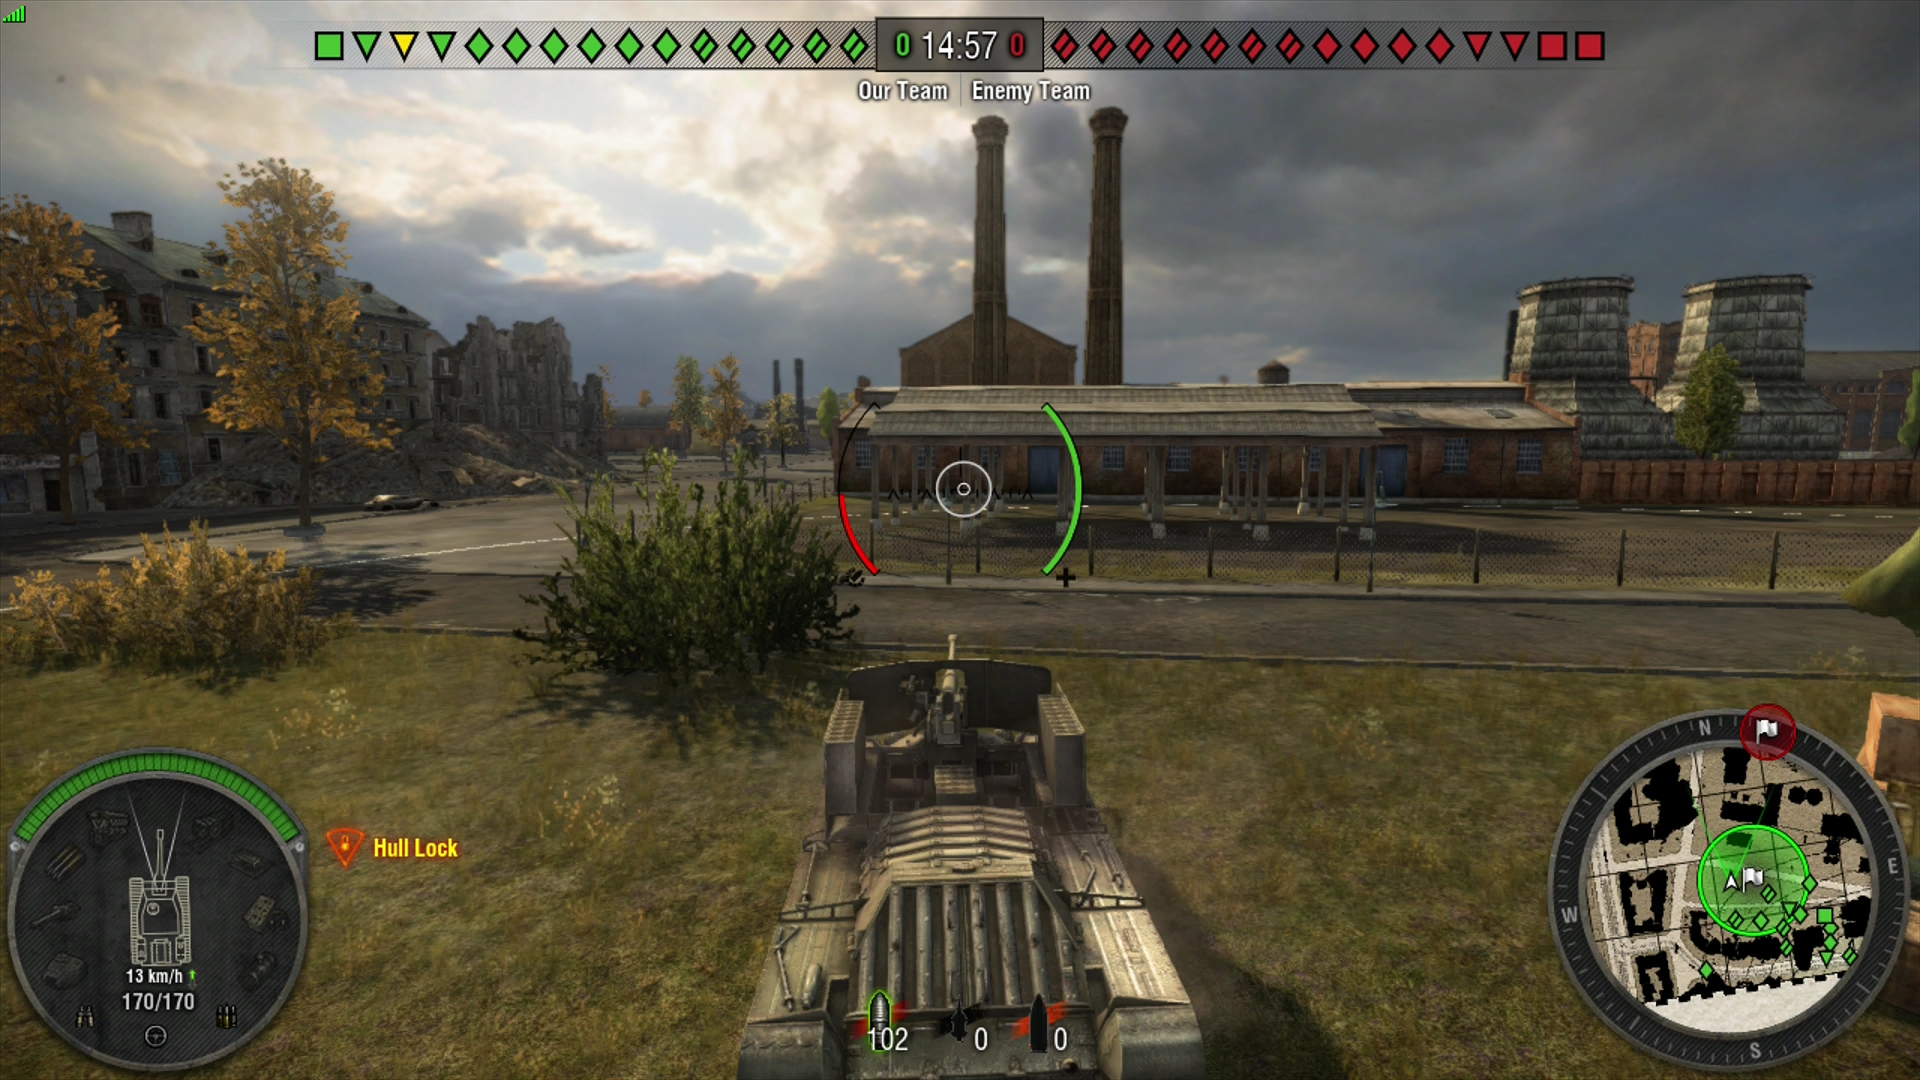 Nodig uit Afrika familie World of Tanks: Xbox 360 Edition Review - GameSpot